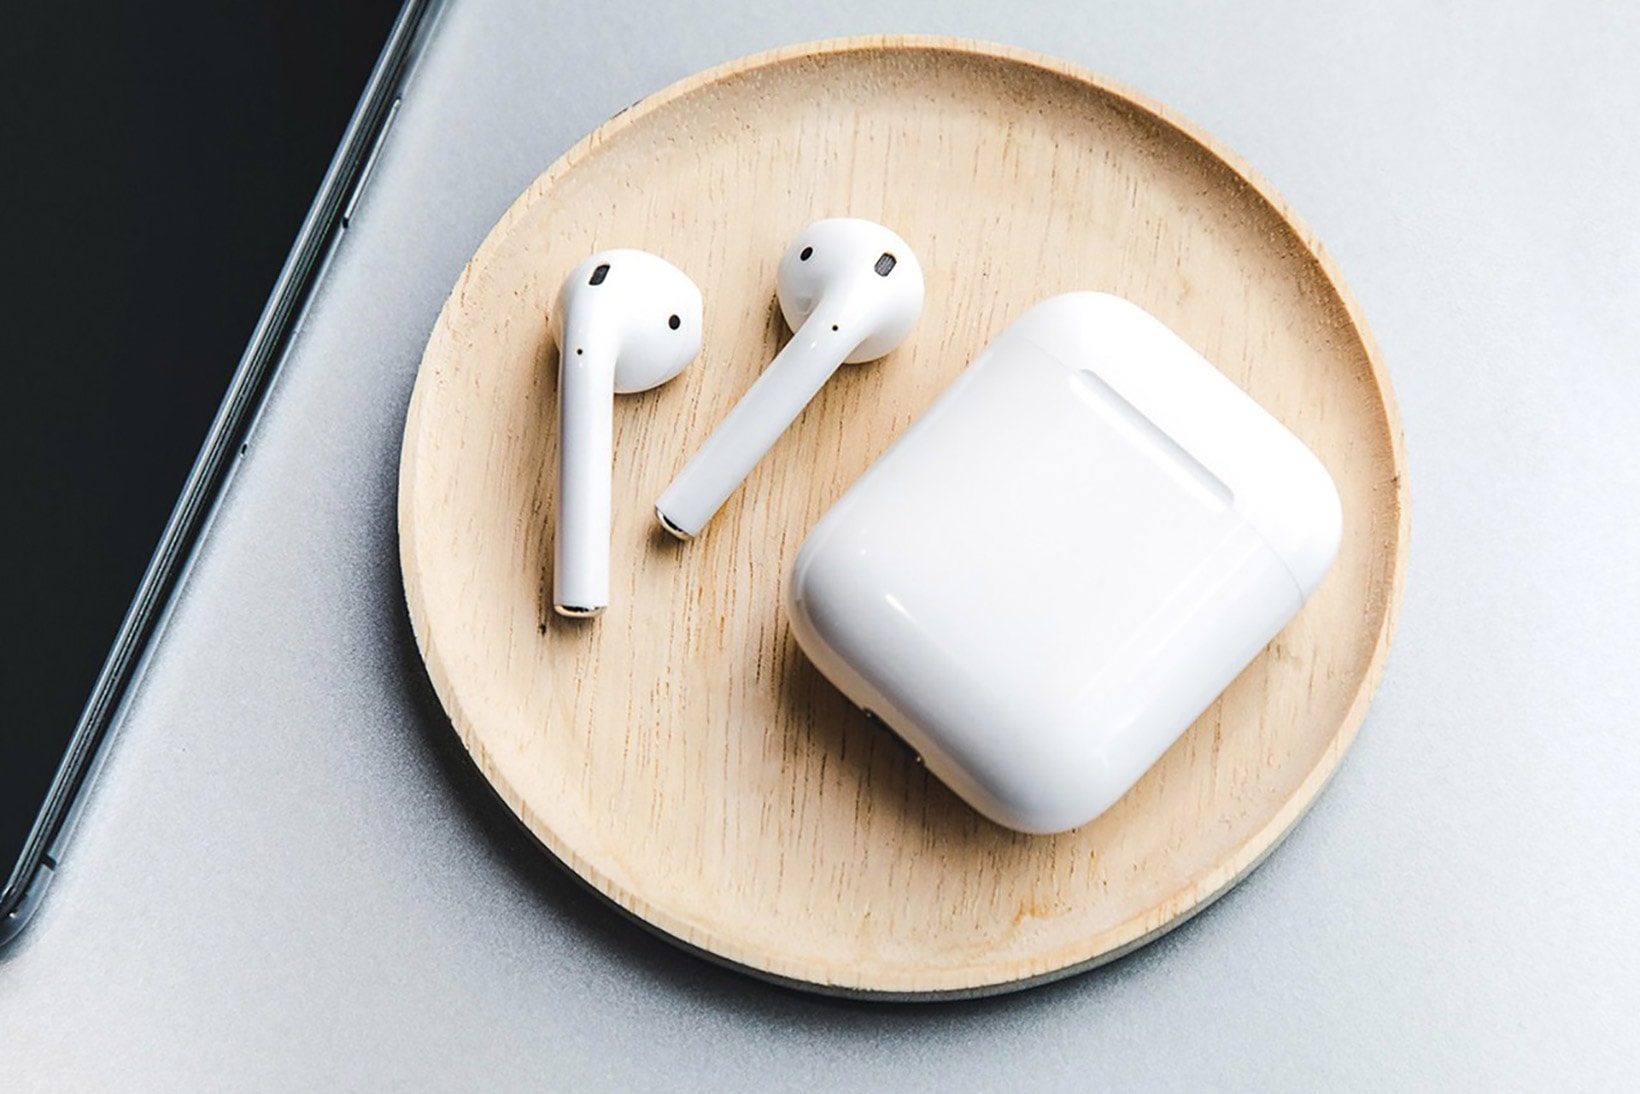 apple bose sue lawsuit airpods wireless headphone earbuds technology